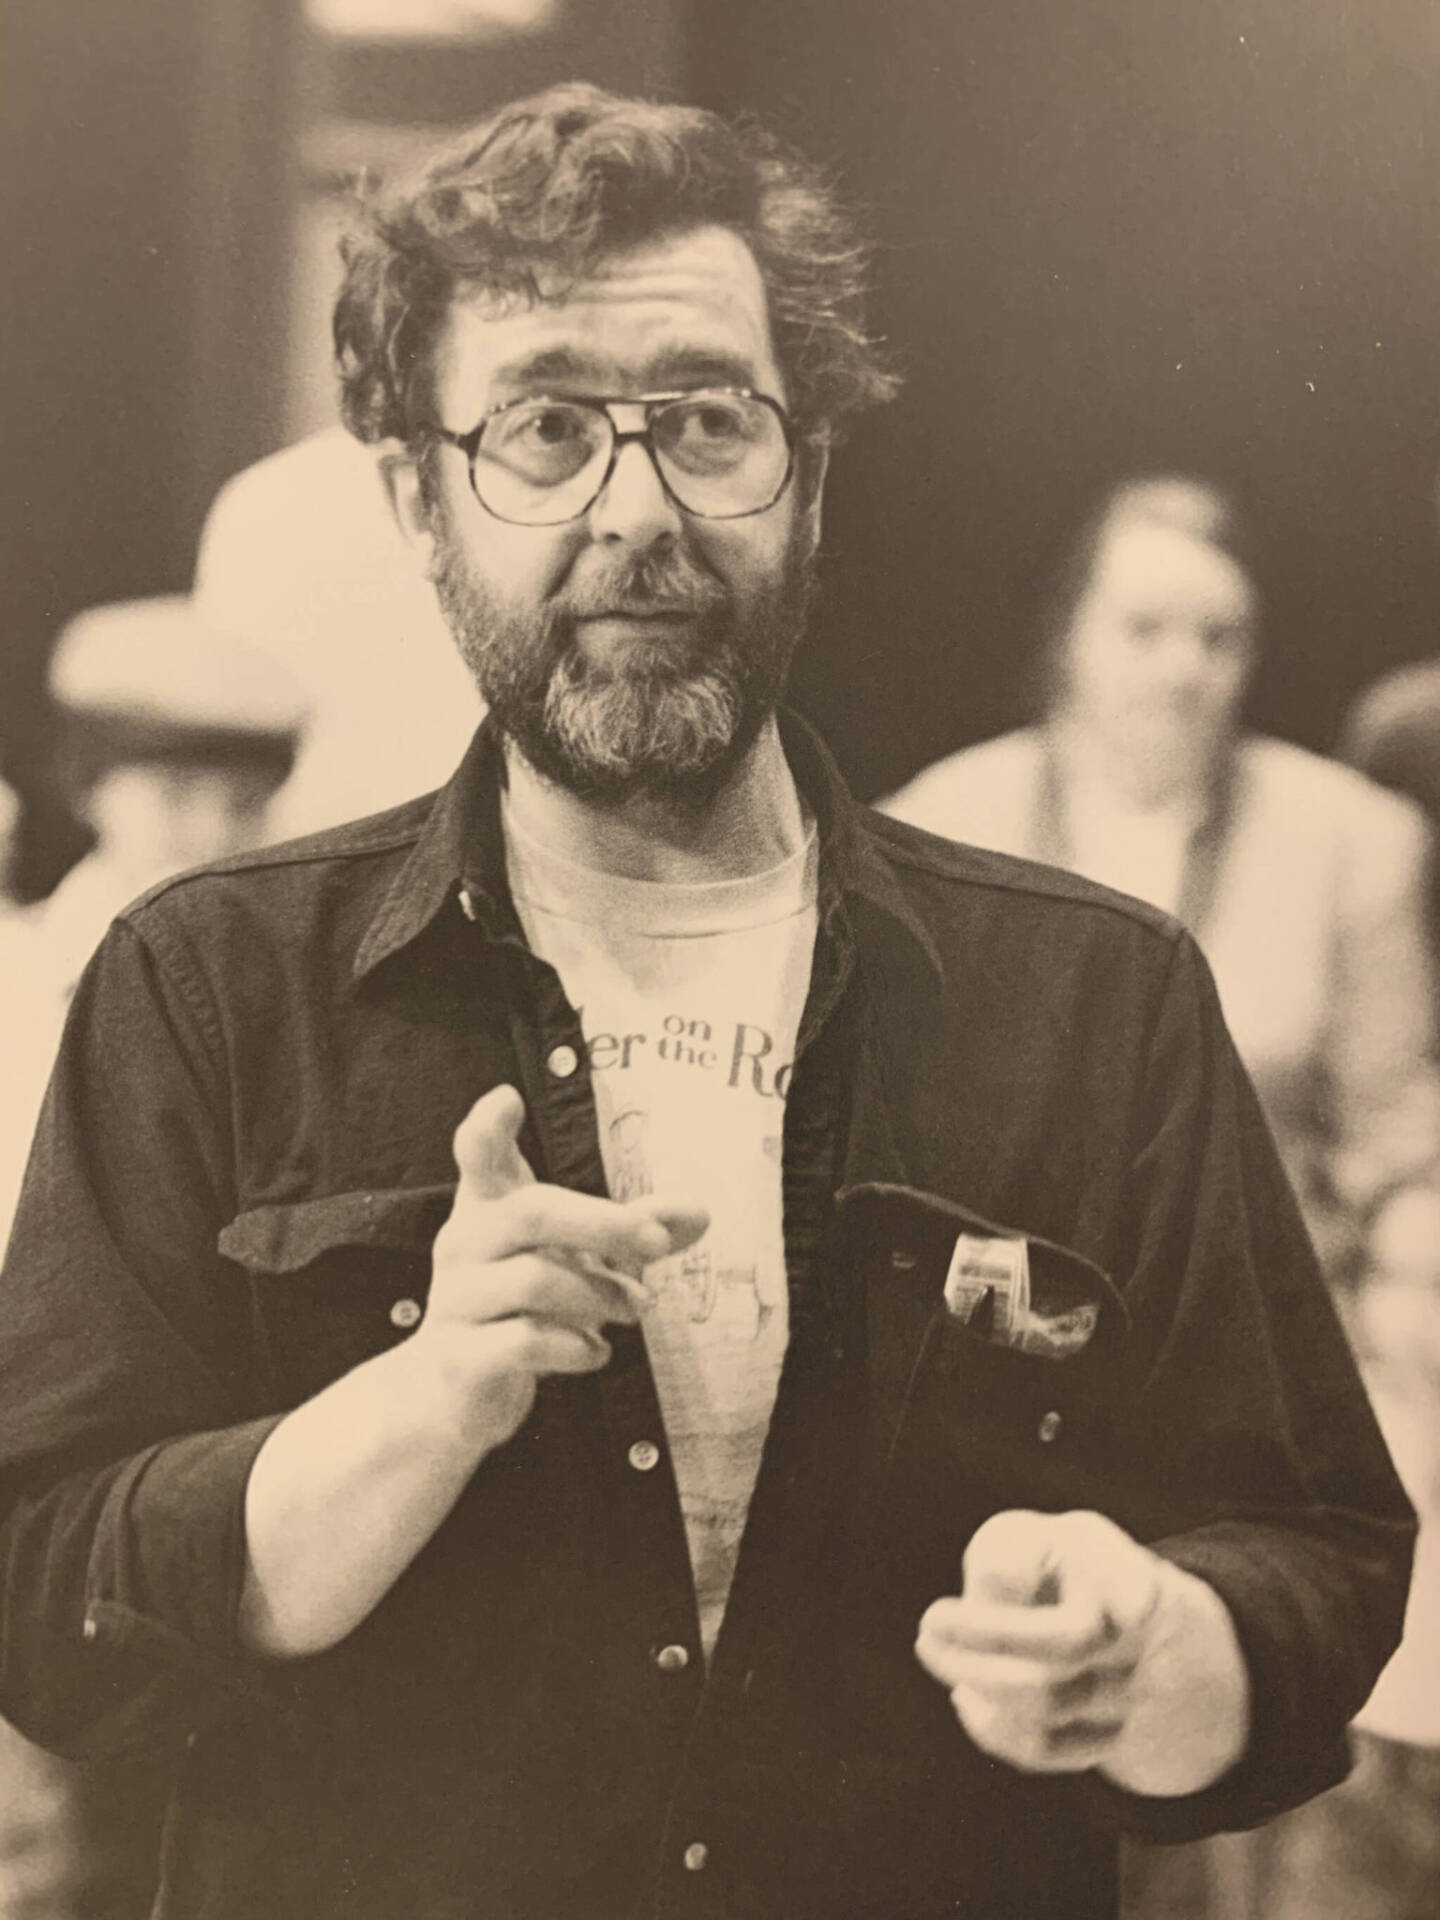 Pier One Theatre’s longtime director, Lance Petersen, is photographed directing a rehearsal of the production “Music Man” in 1982 in Kenai, Alaska. Photo courtesy of Pier One Theatre